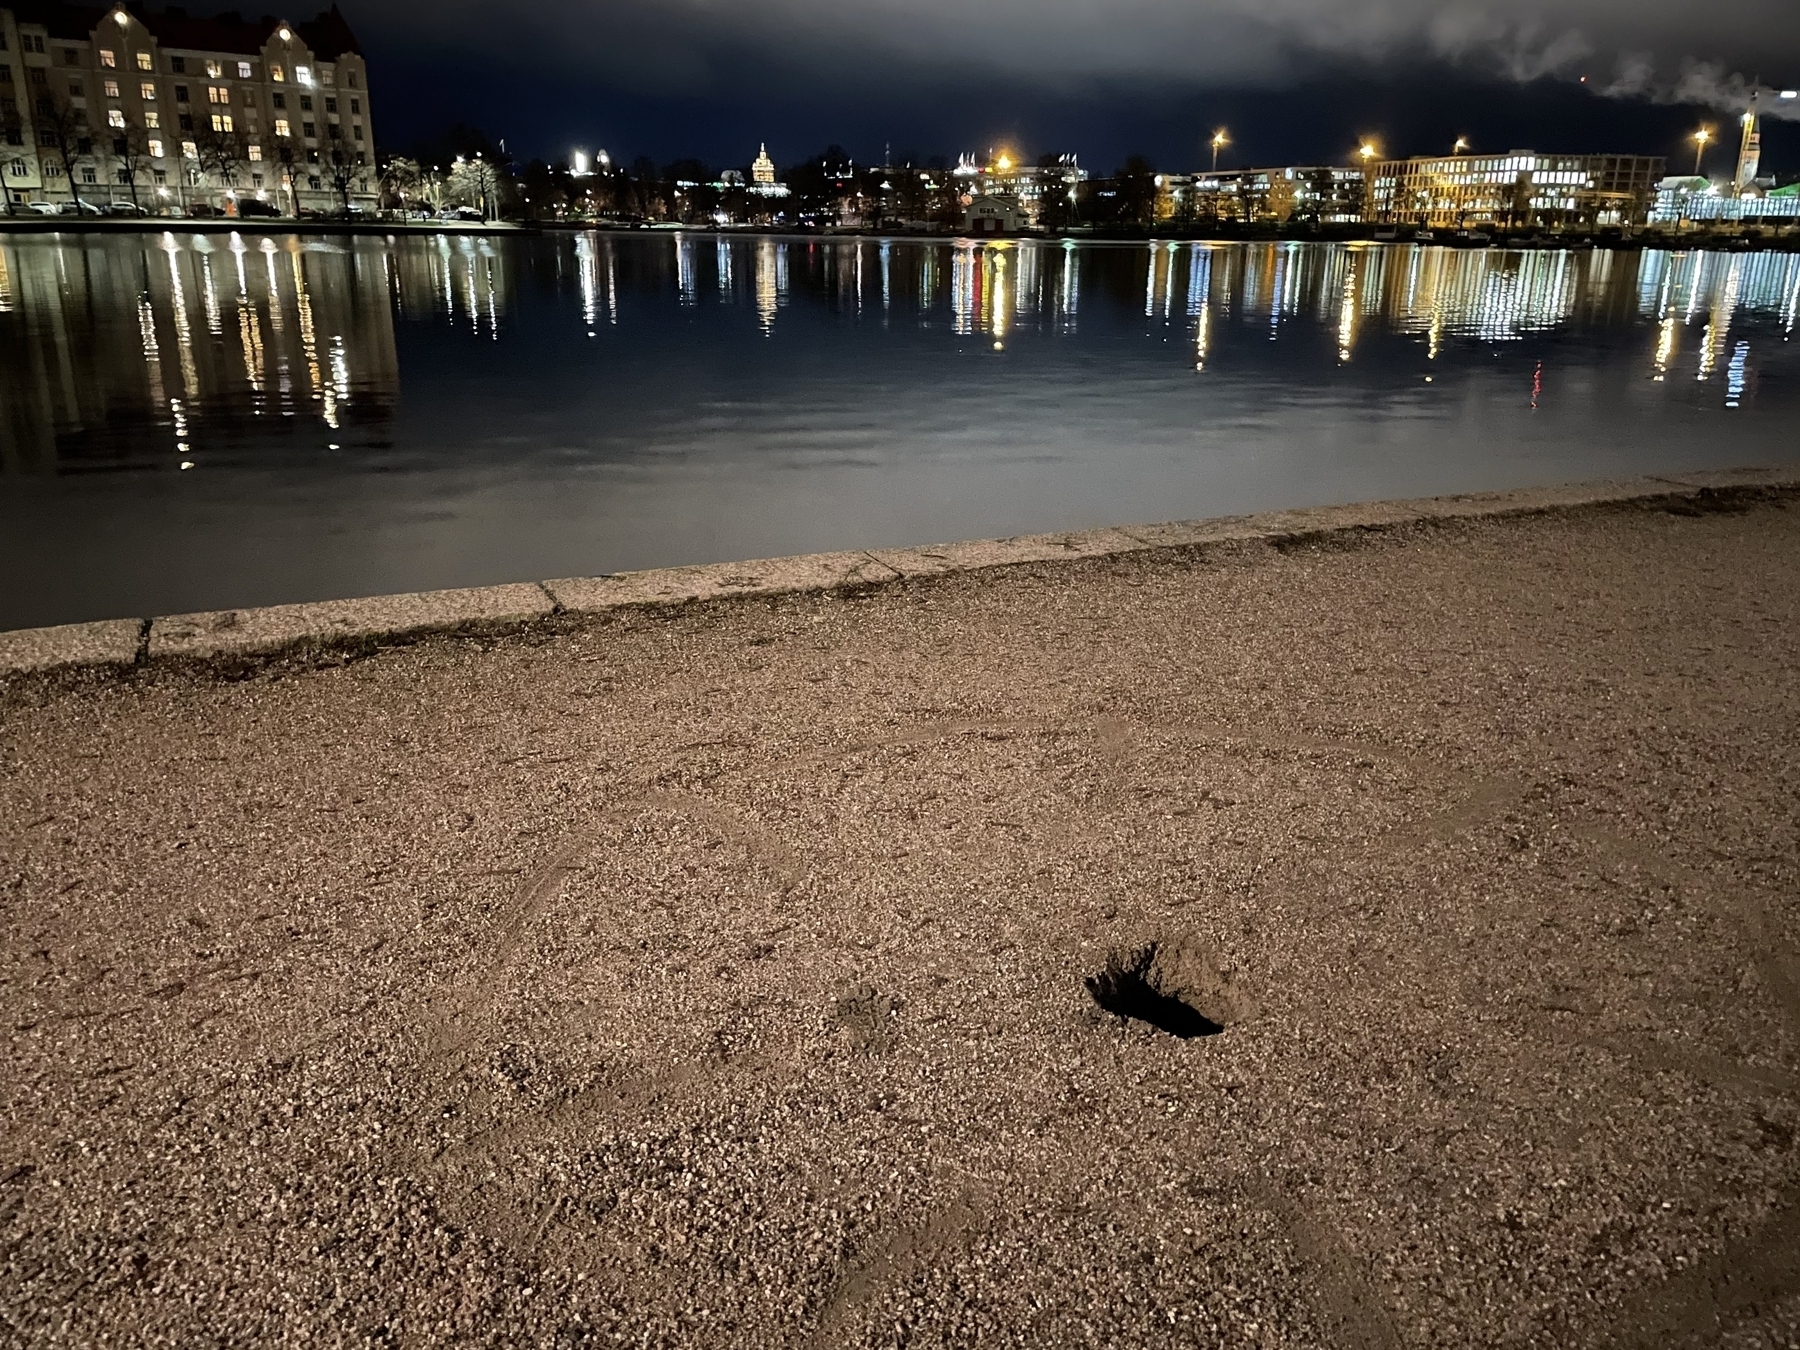 Tokoinranta, Helsinki at night, buildings reflected in water, small hole in the ground